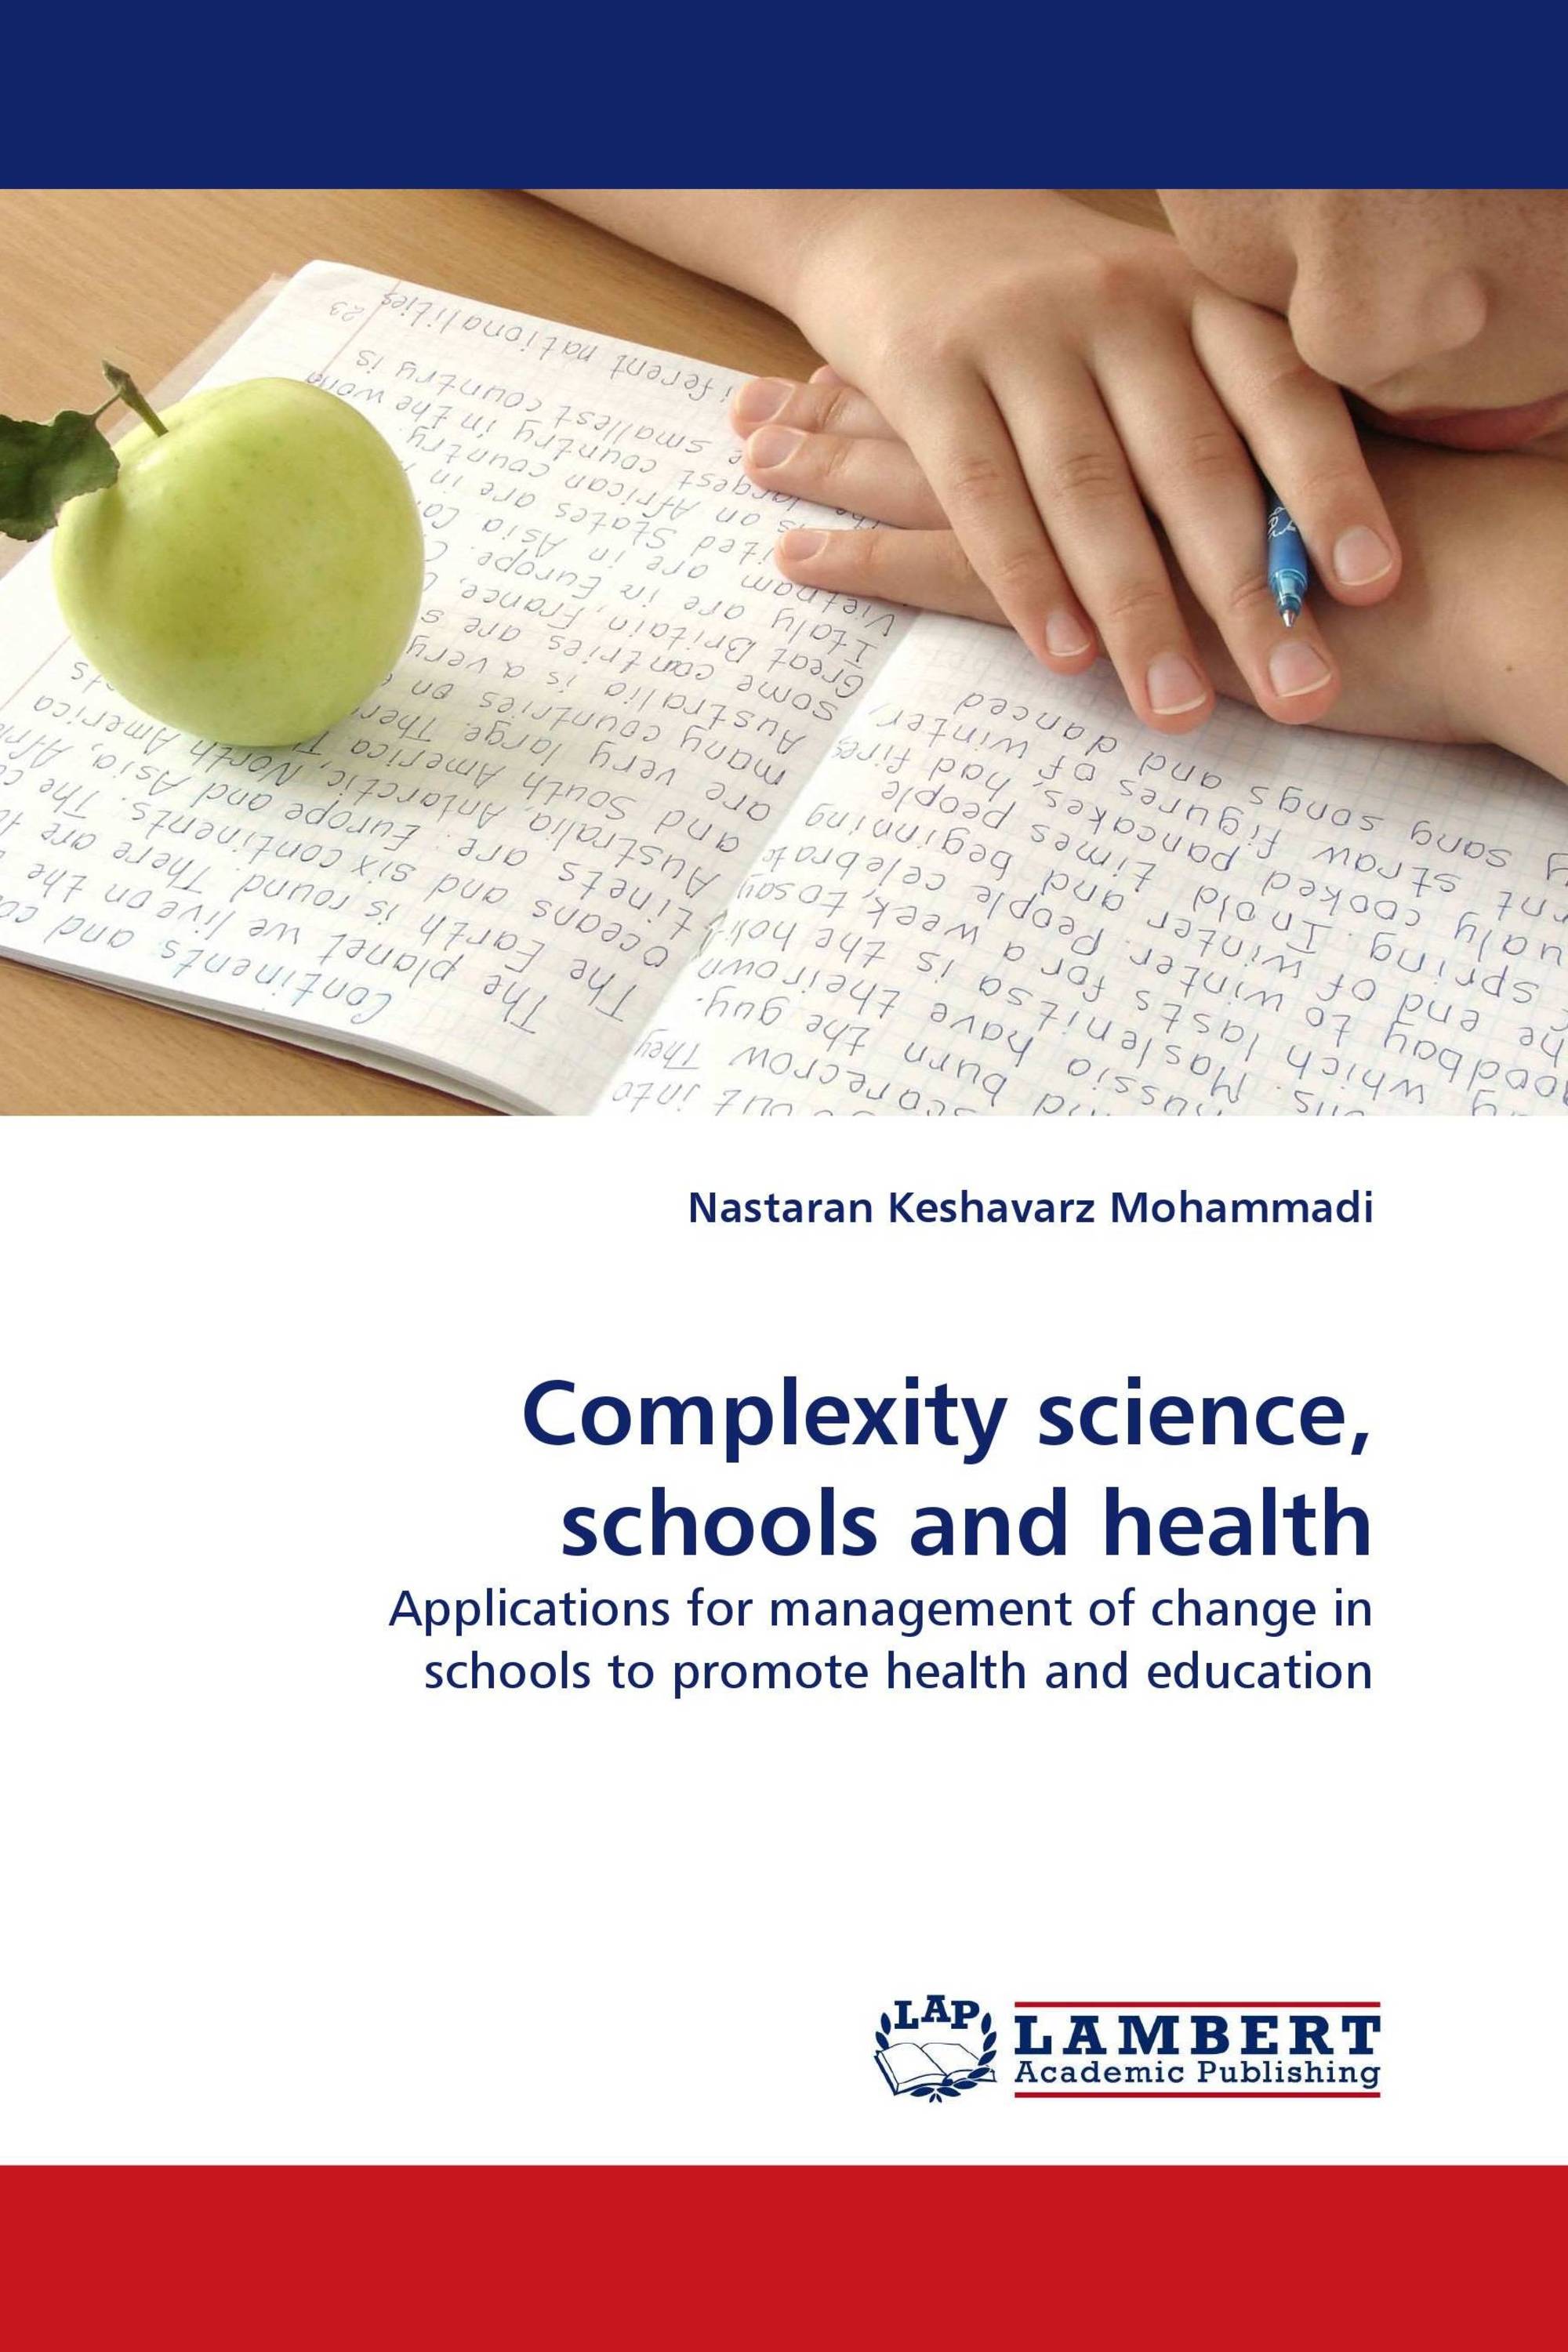 Complexity science, schools and health